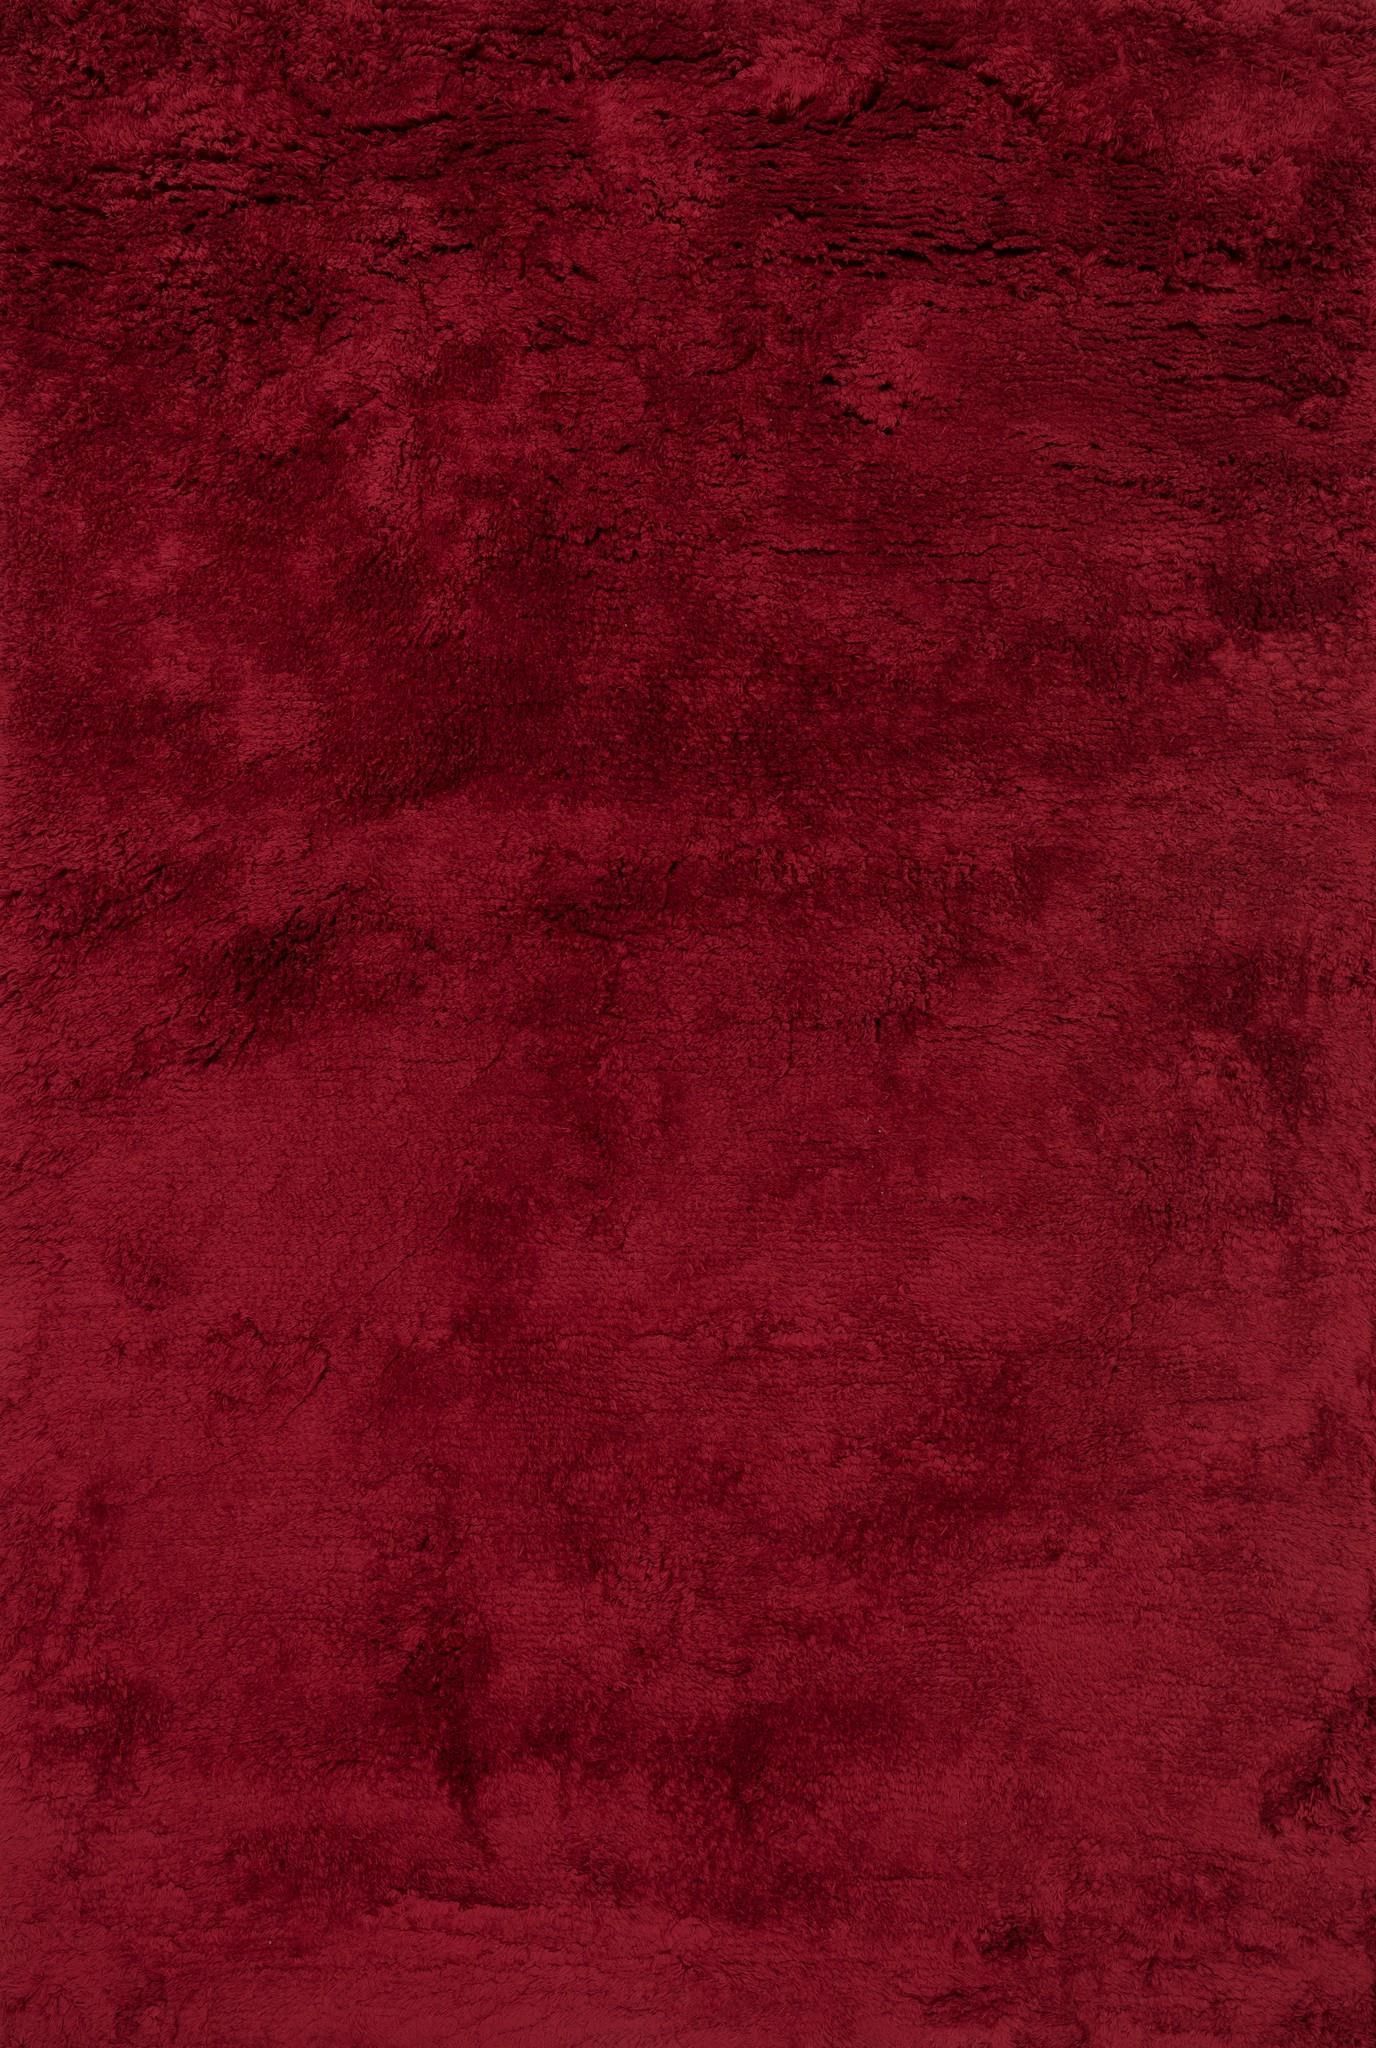 A red rug with white and black lines - Crimson